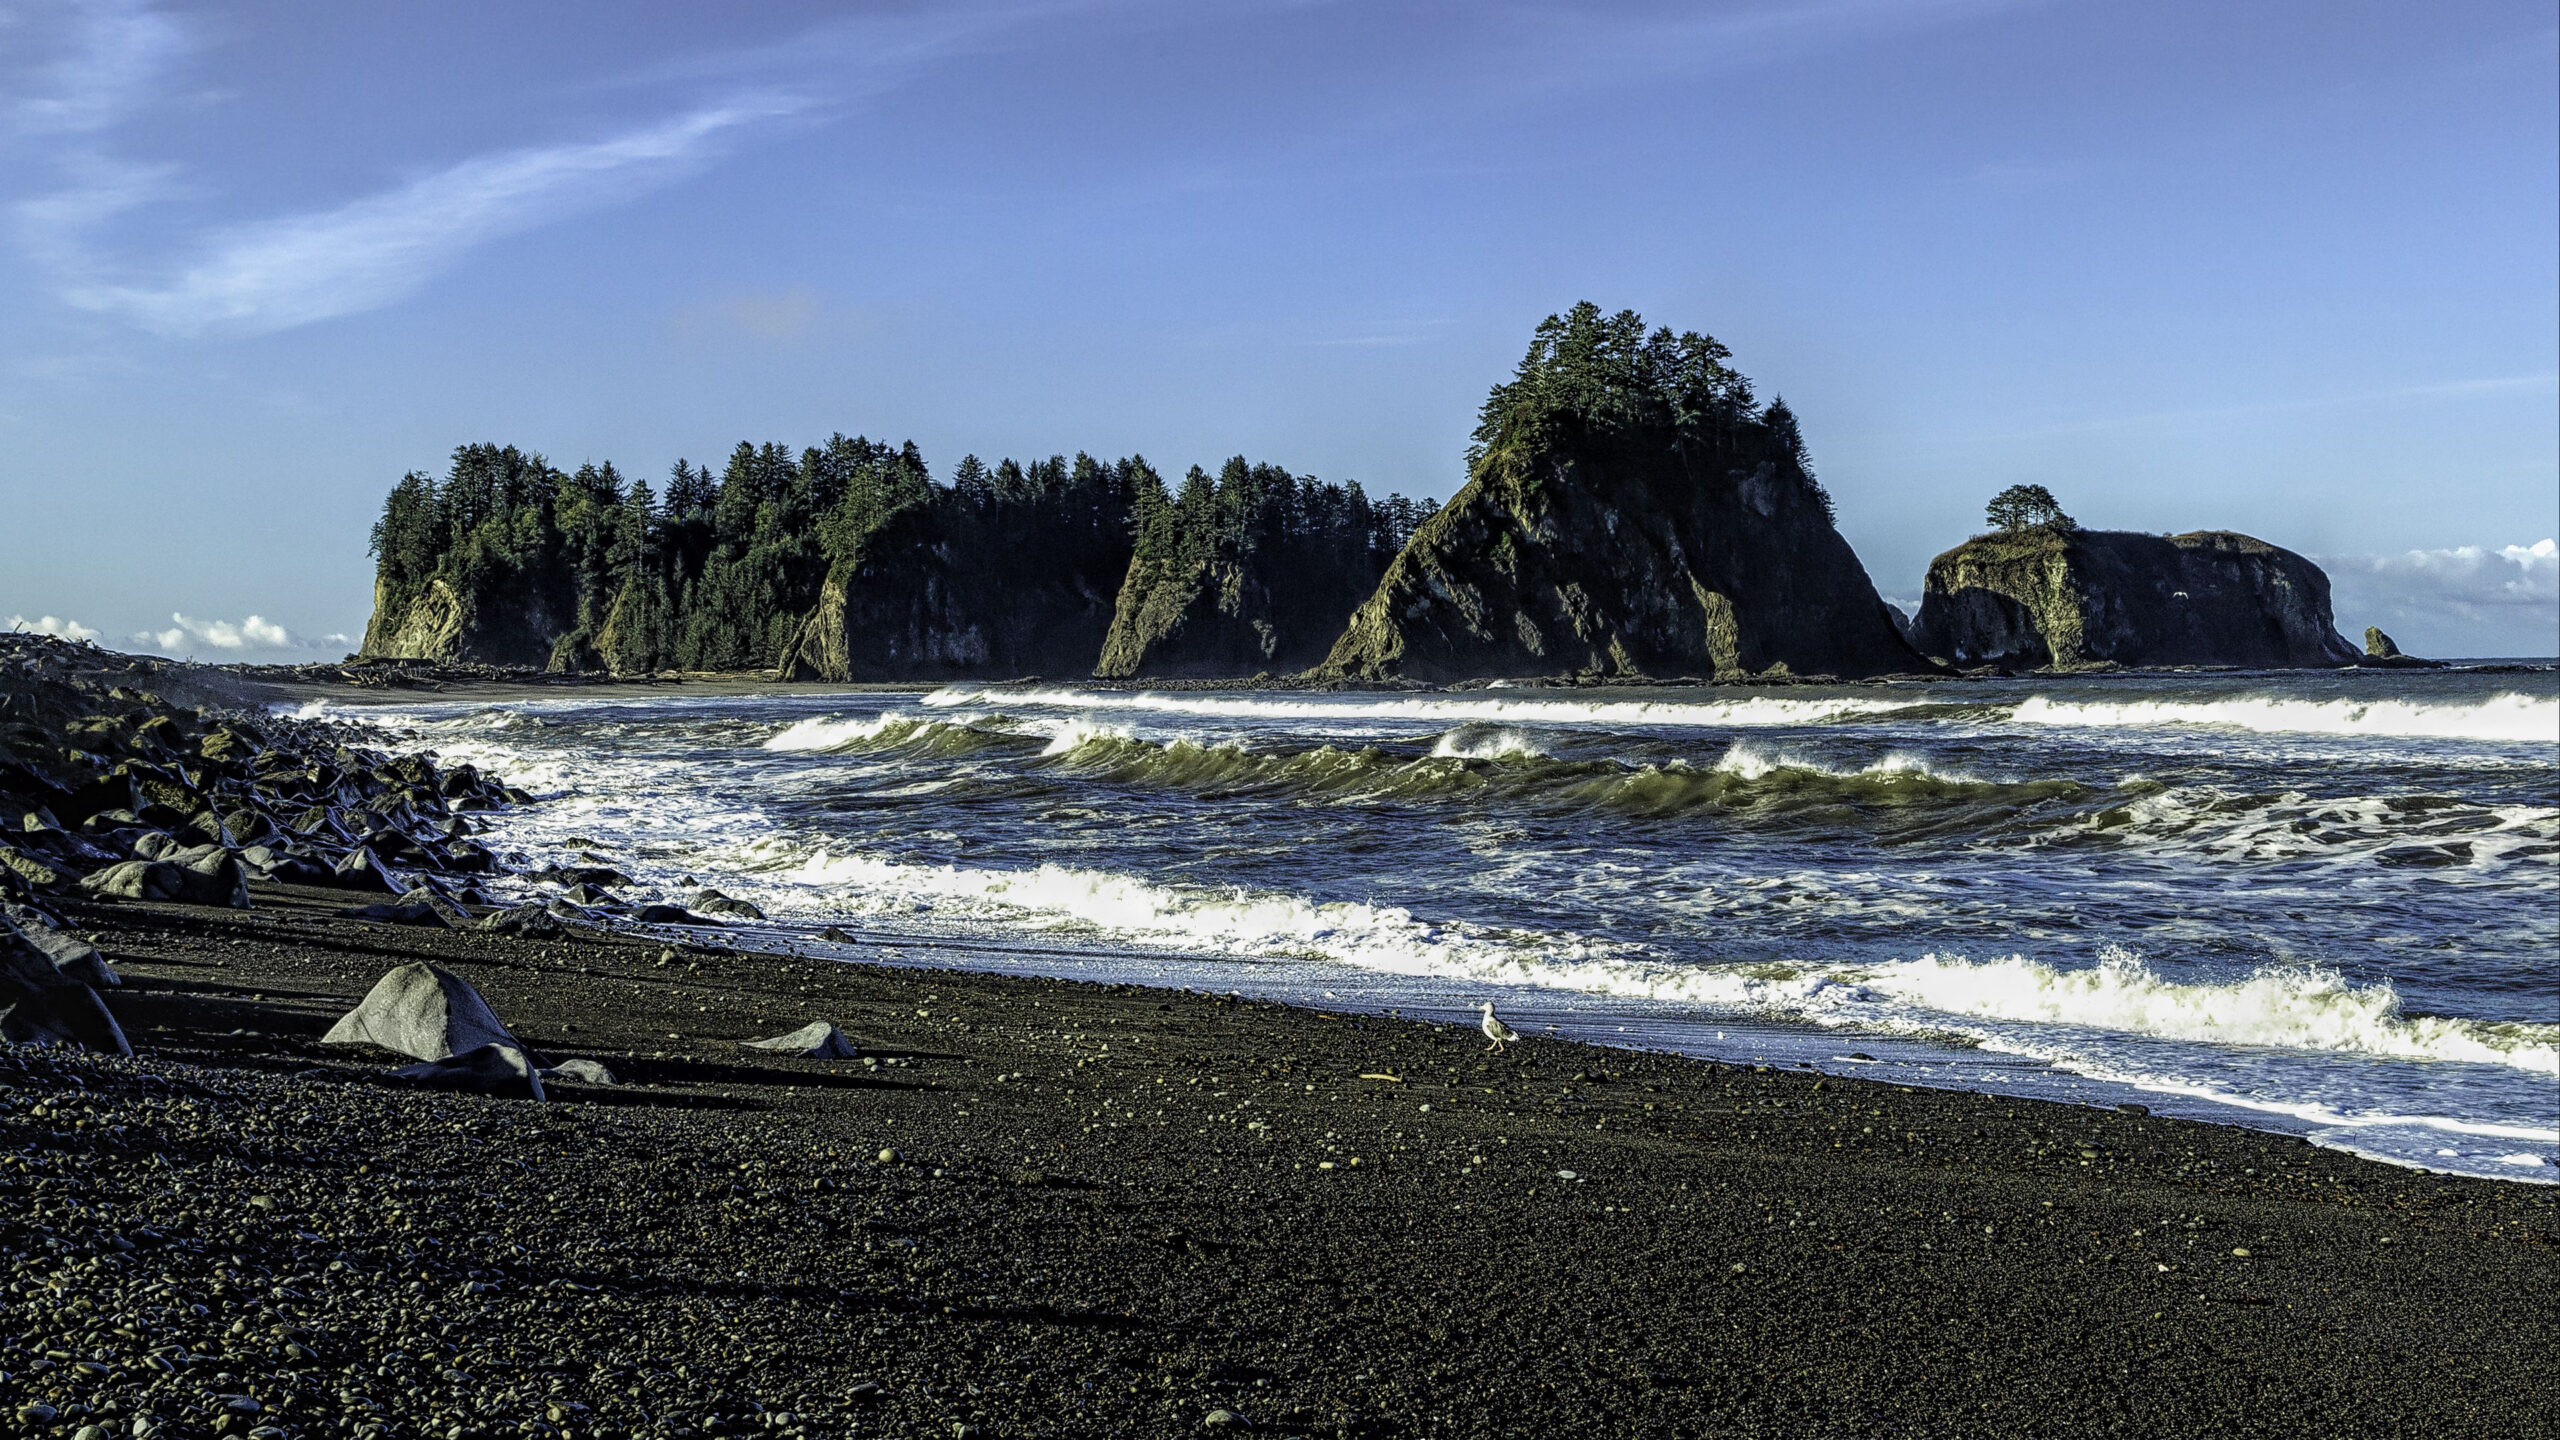 Ocean Waves Black Beach Sand Shells And Landscape View Of Rock Mountains With Green Trees Under Blue Sky K 2K Nature